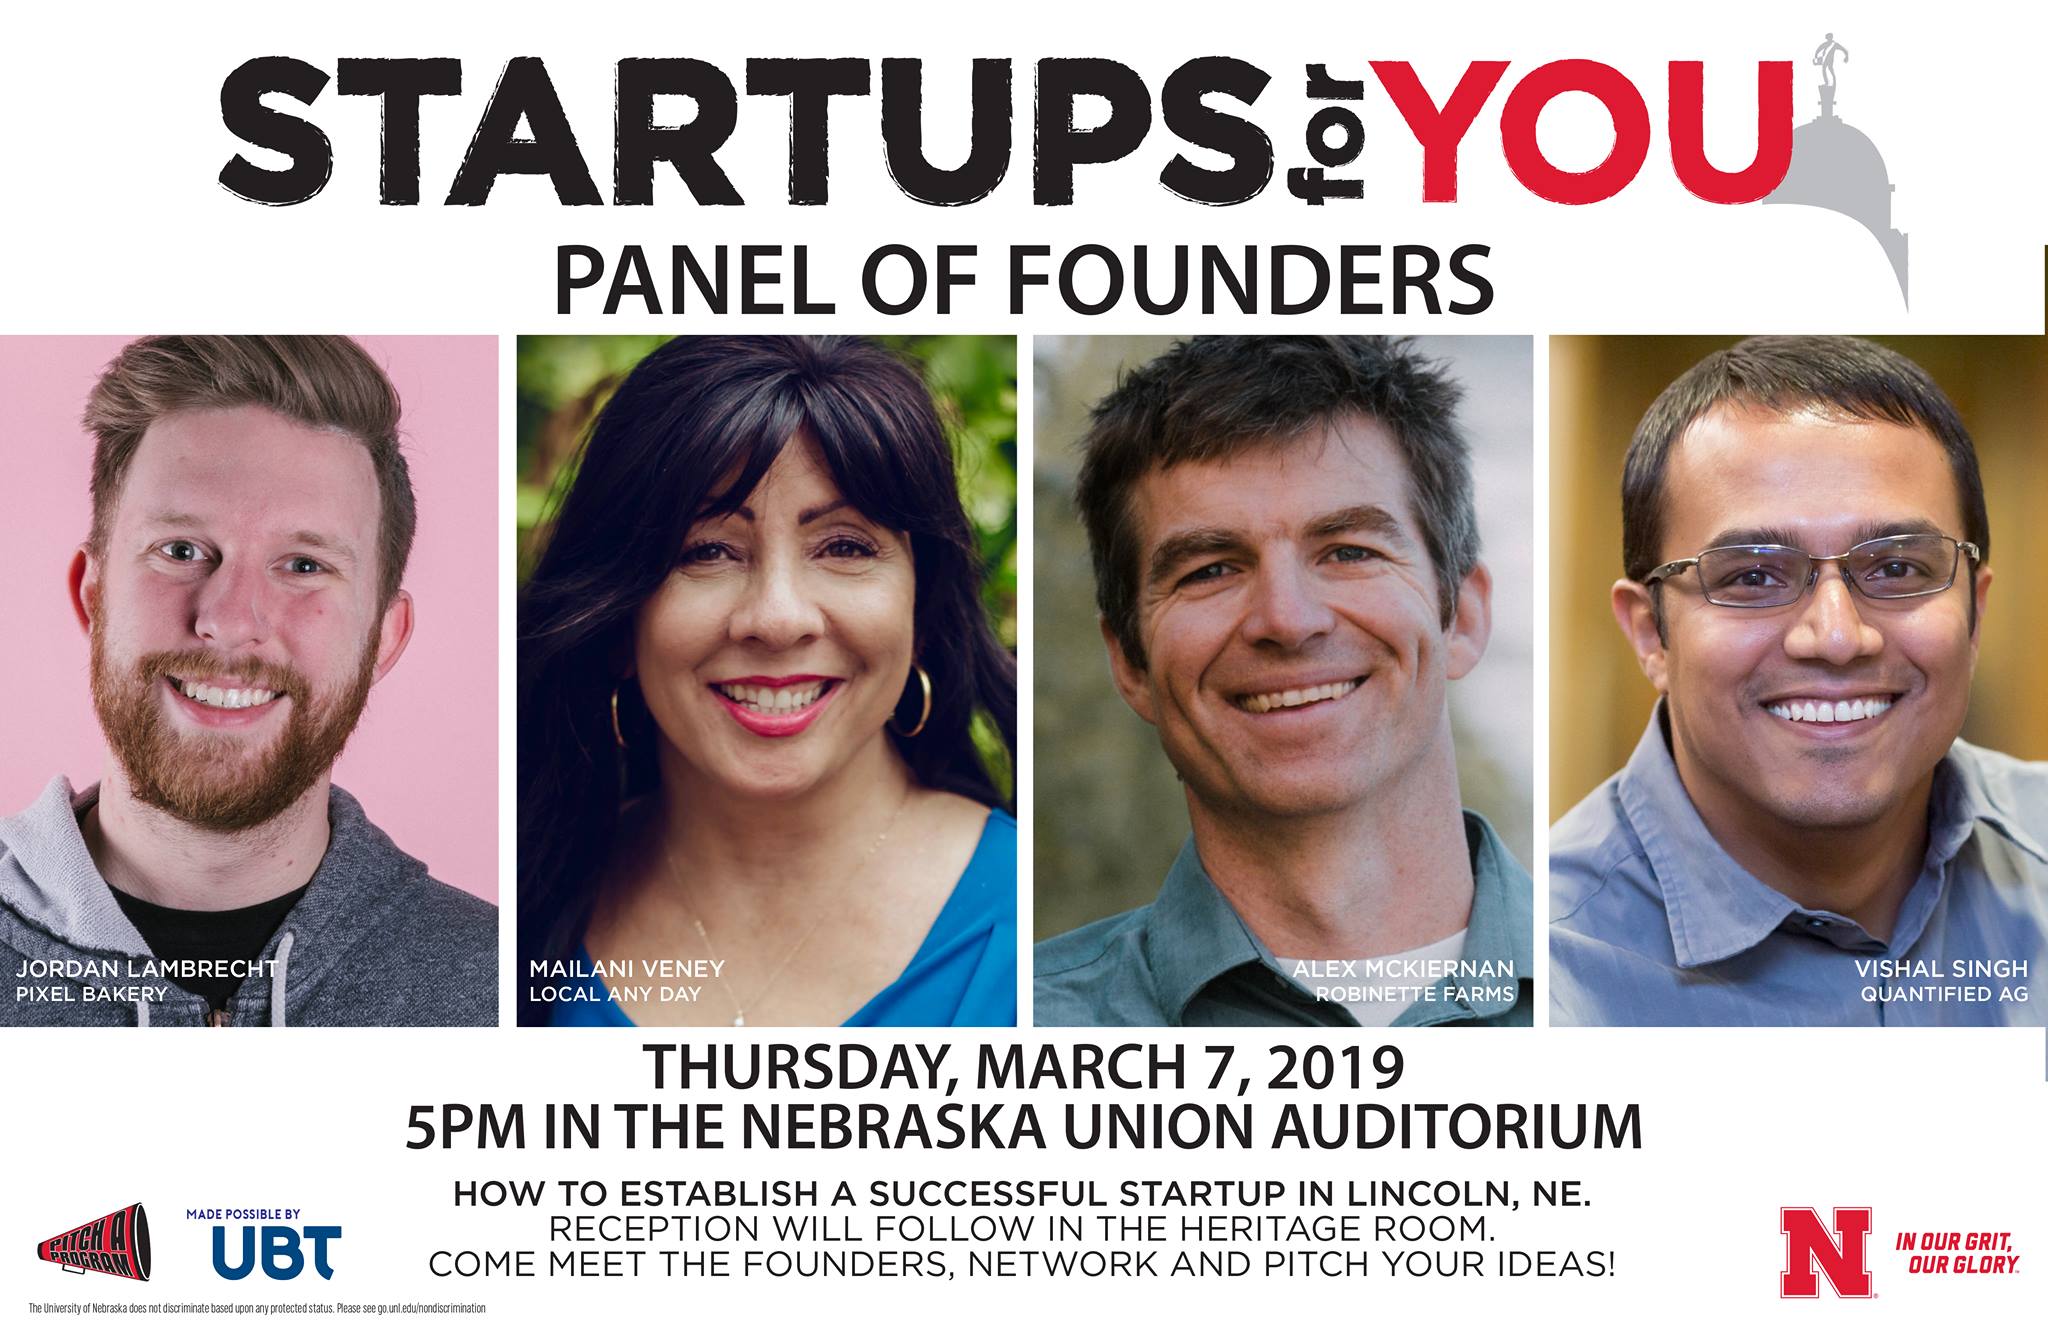 Learn from individuals who have established successful startups.